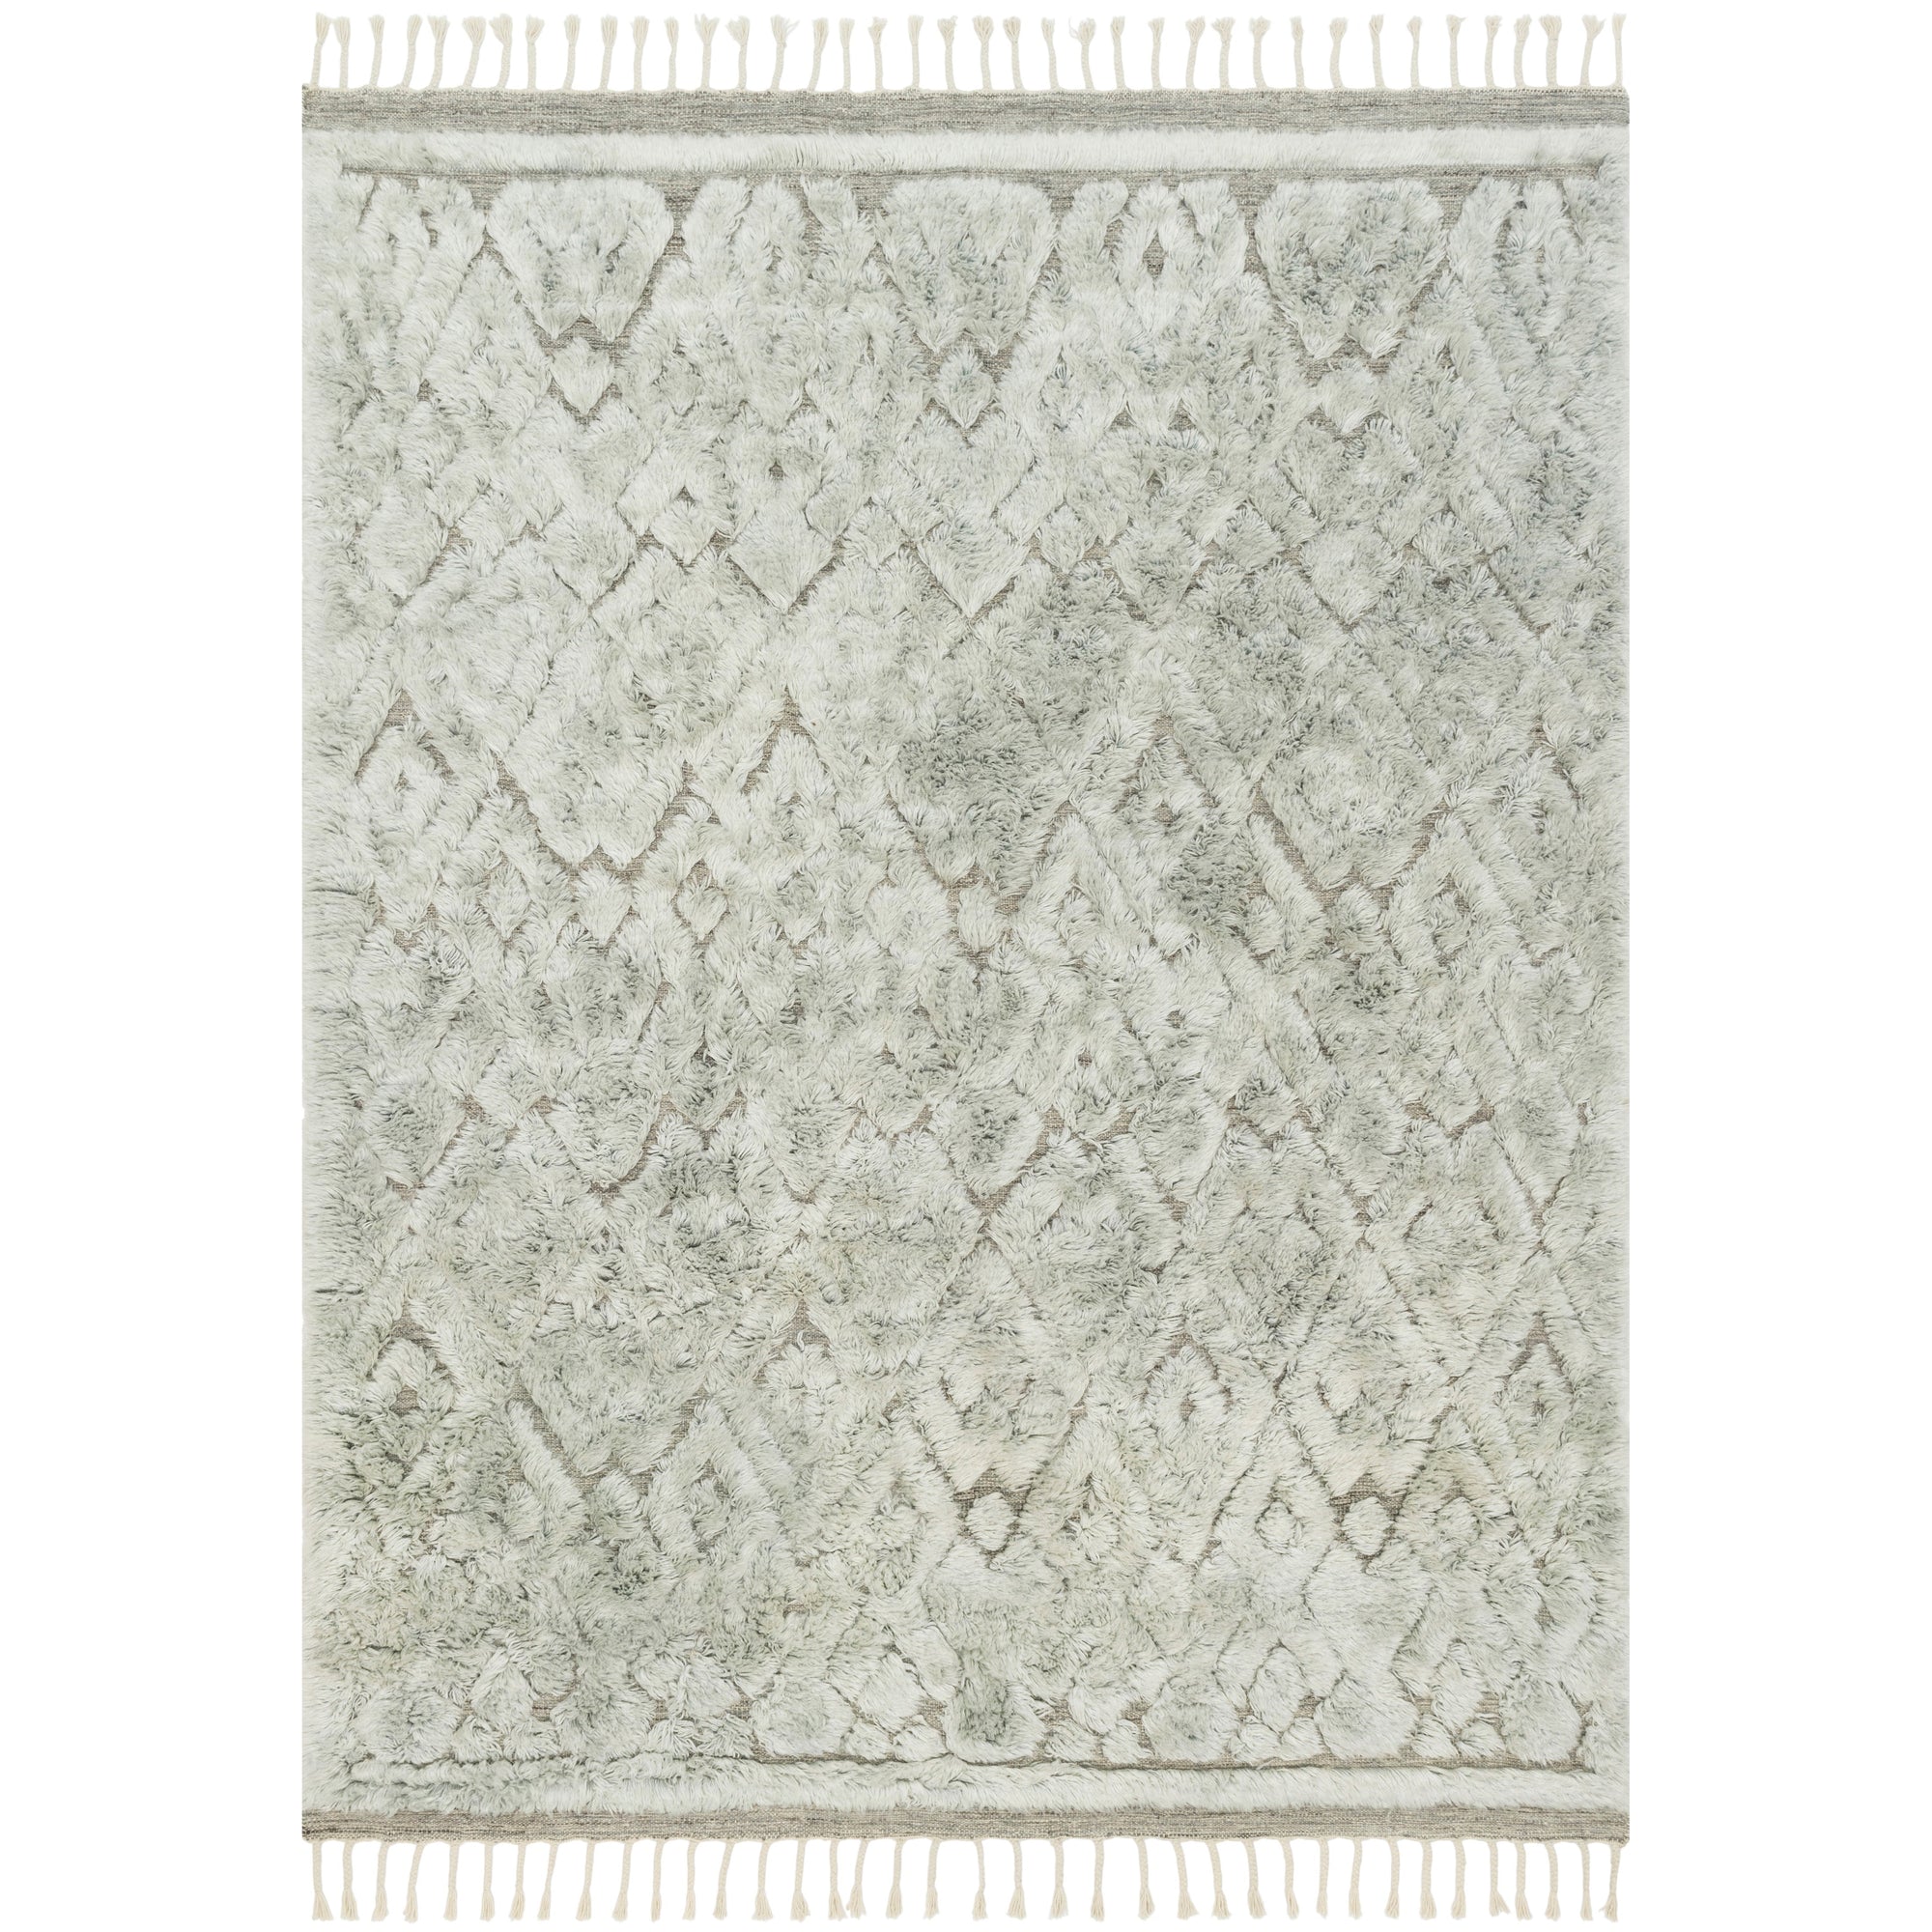 Rugs by Roo Loloi Hygge Grey Mist Area Rug in size 18" x 18" Sample